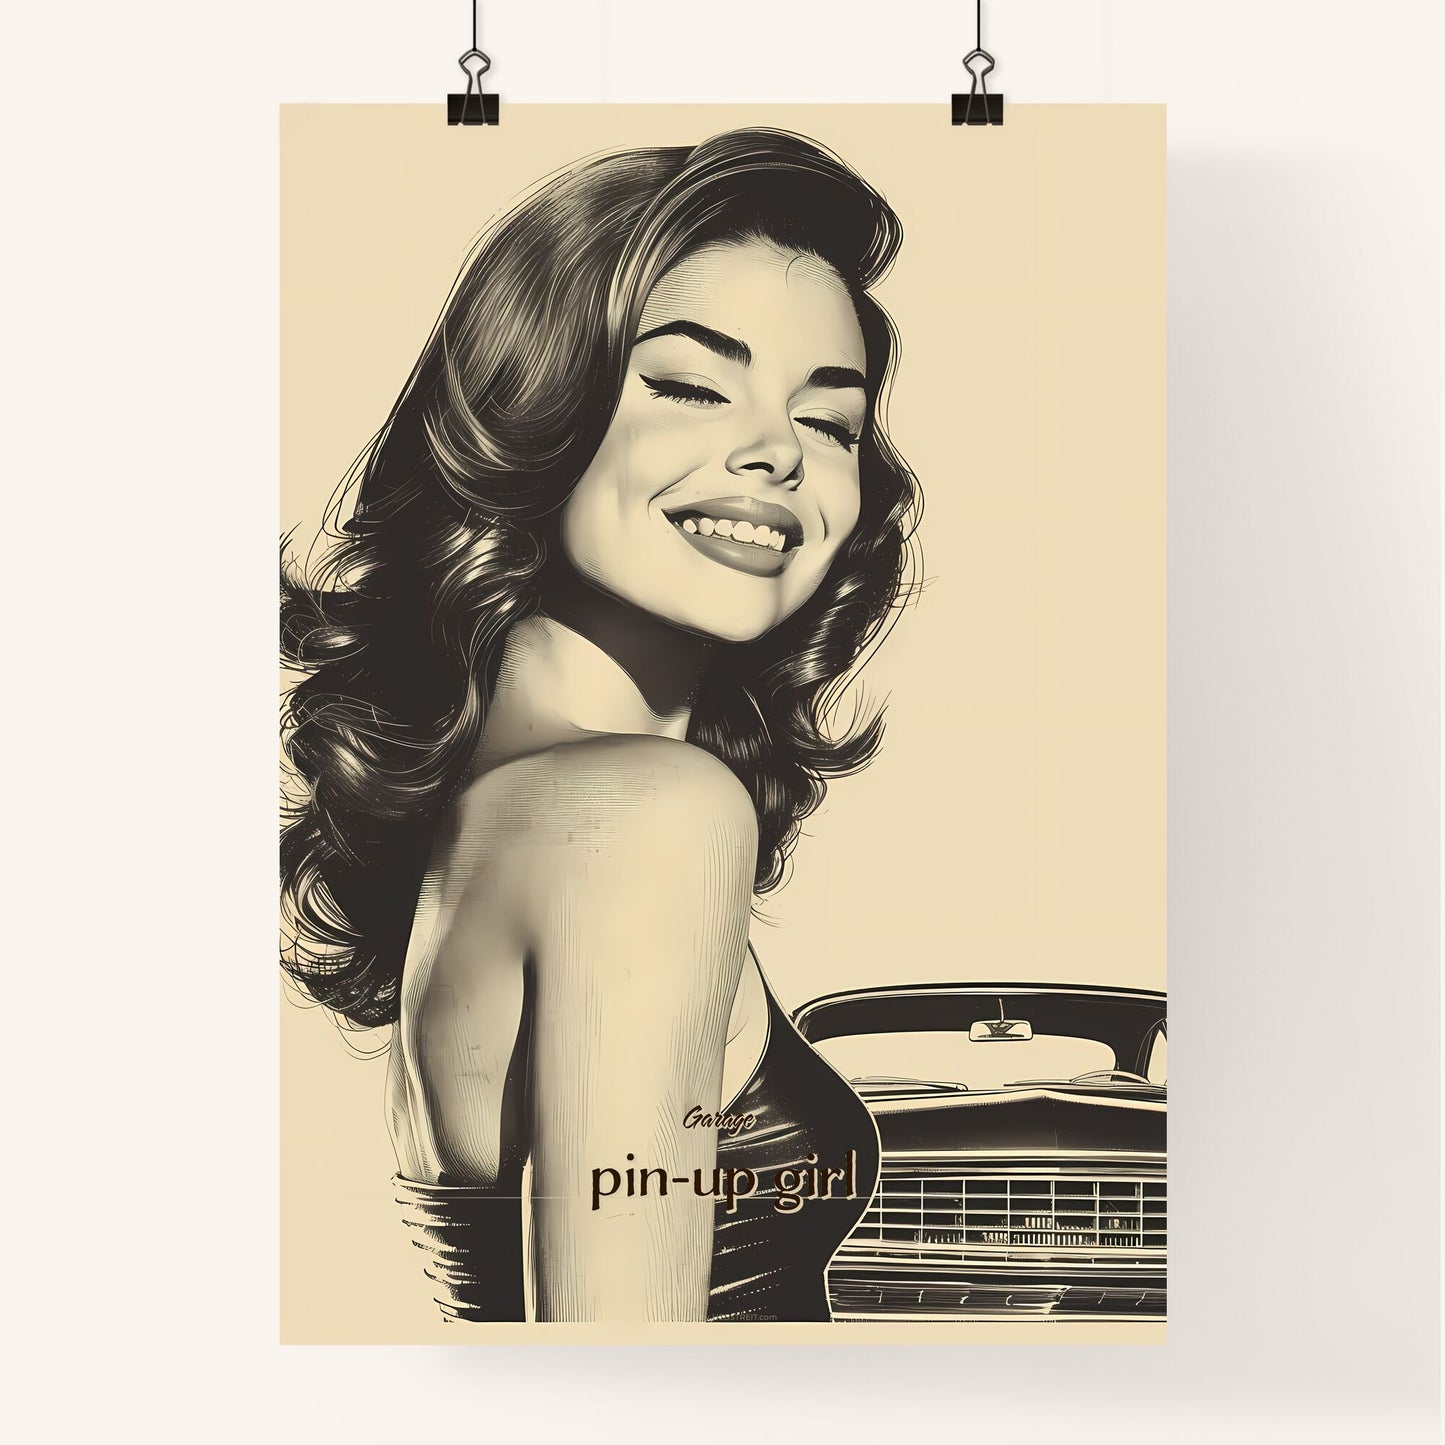 Garage, pin-up girl, A Poster of a woman with long hair and a car Default Title